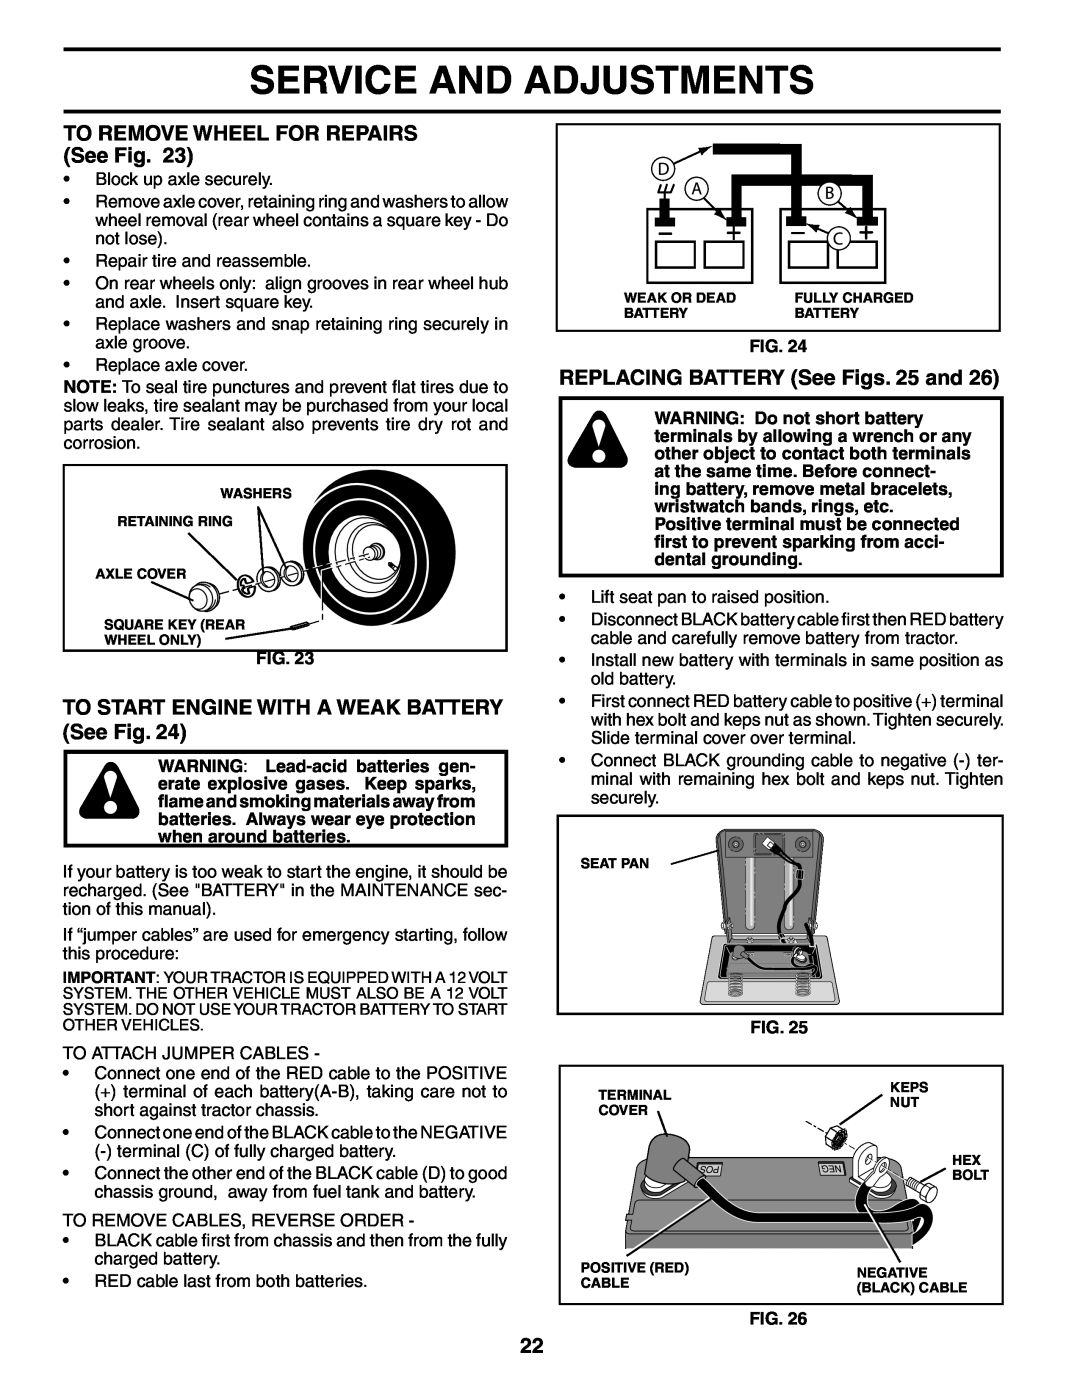 Weed Eater WE1338A, 184404 manual TO REMOVE WHEEL FOR REPAIRS See Fig, TO START ENGINE WITH A WEAK BATTERY See Fig 